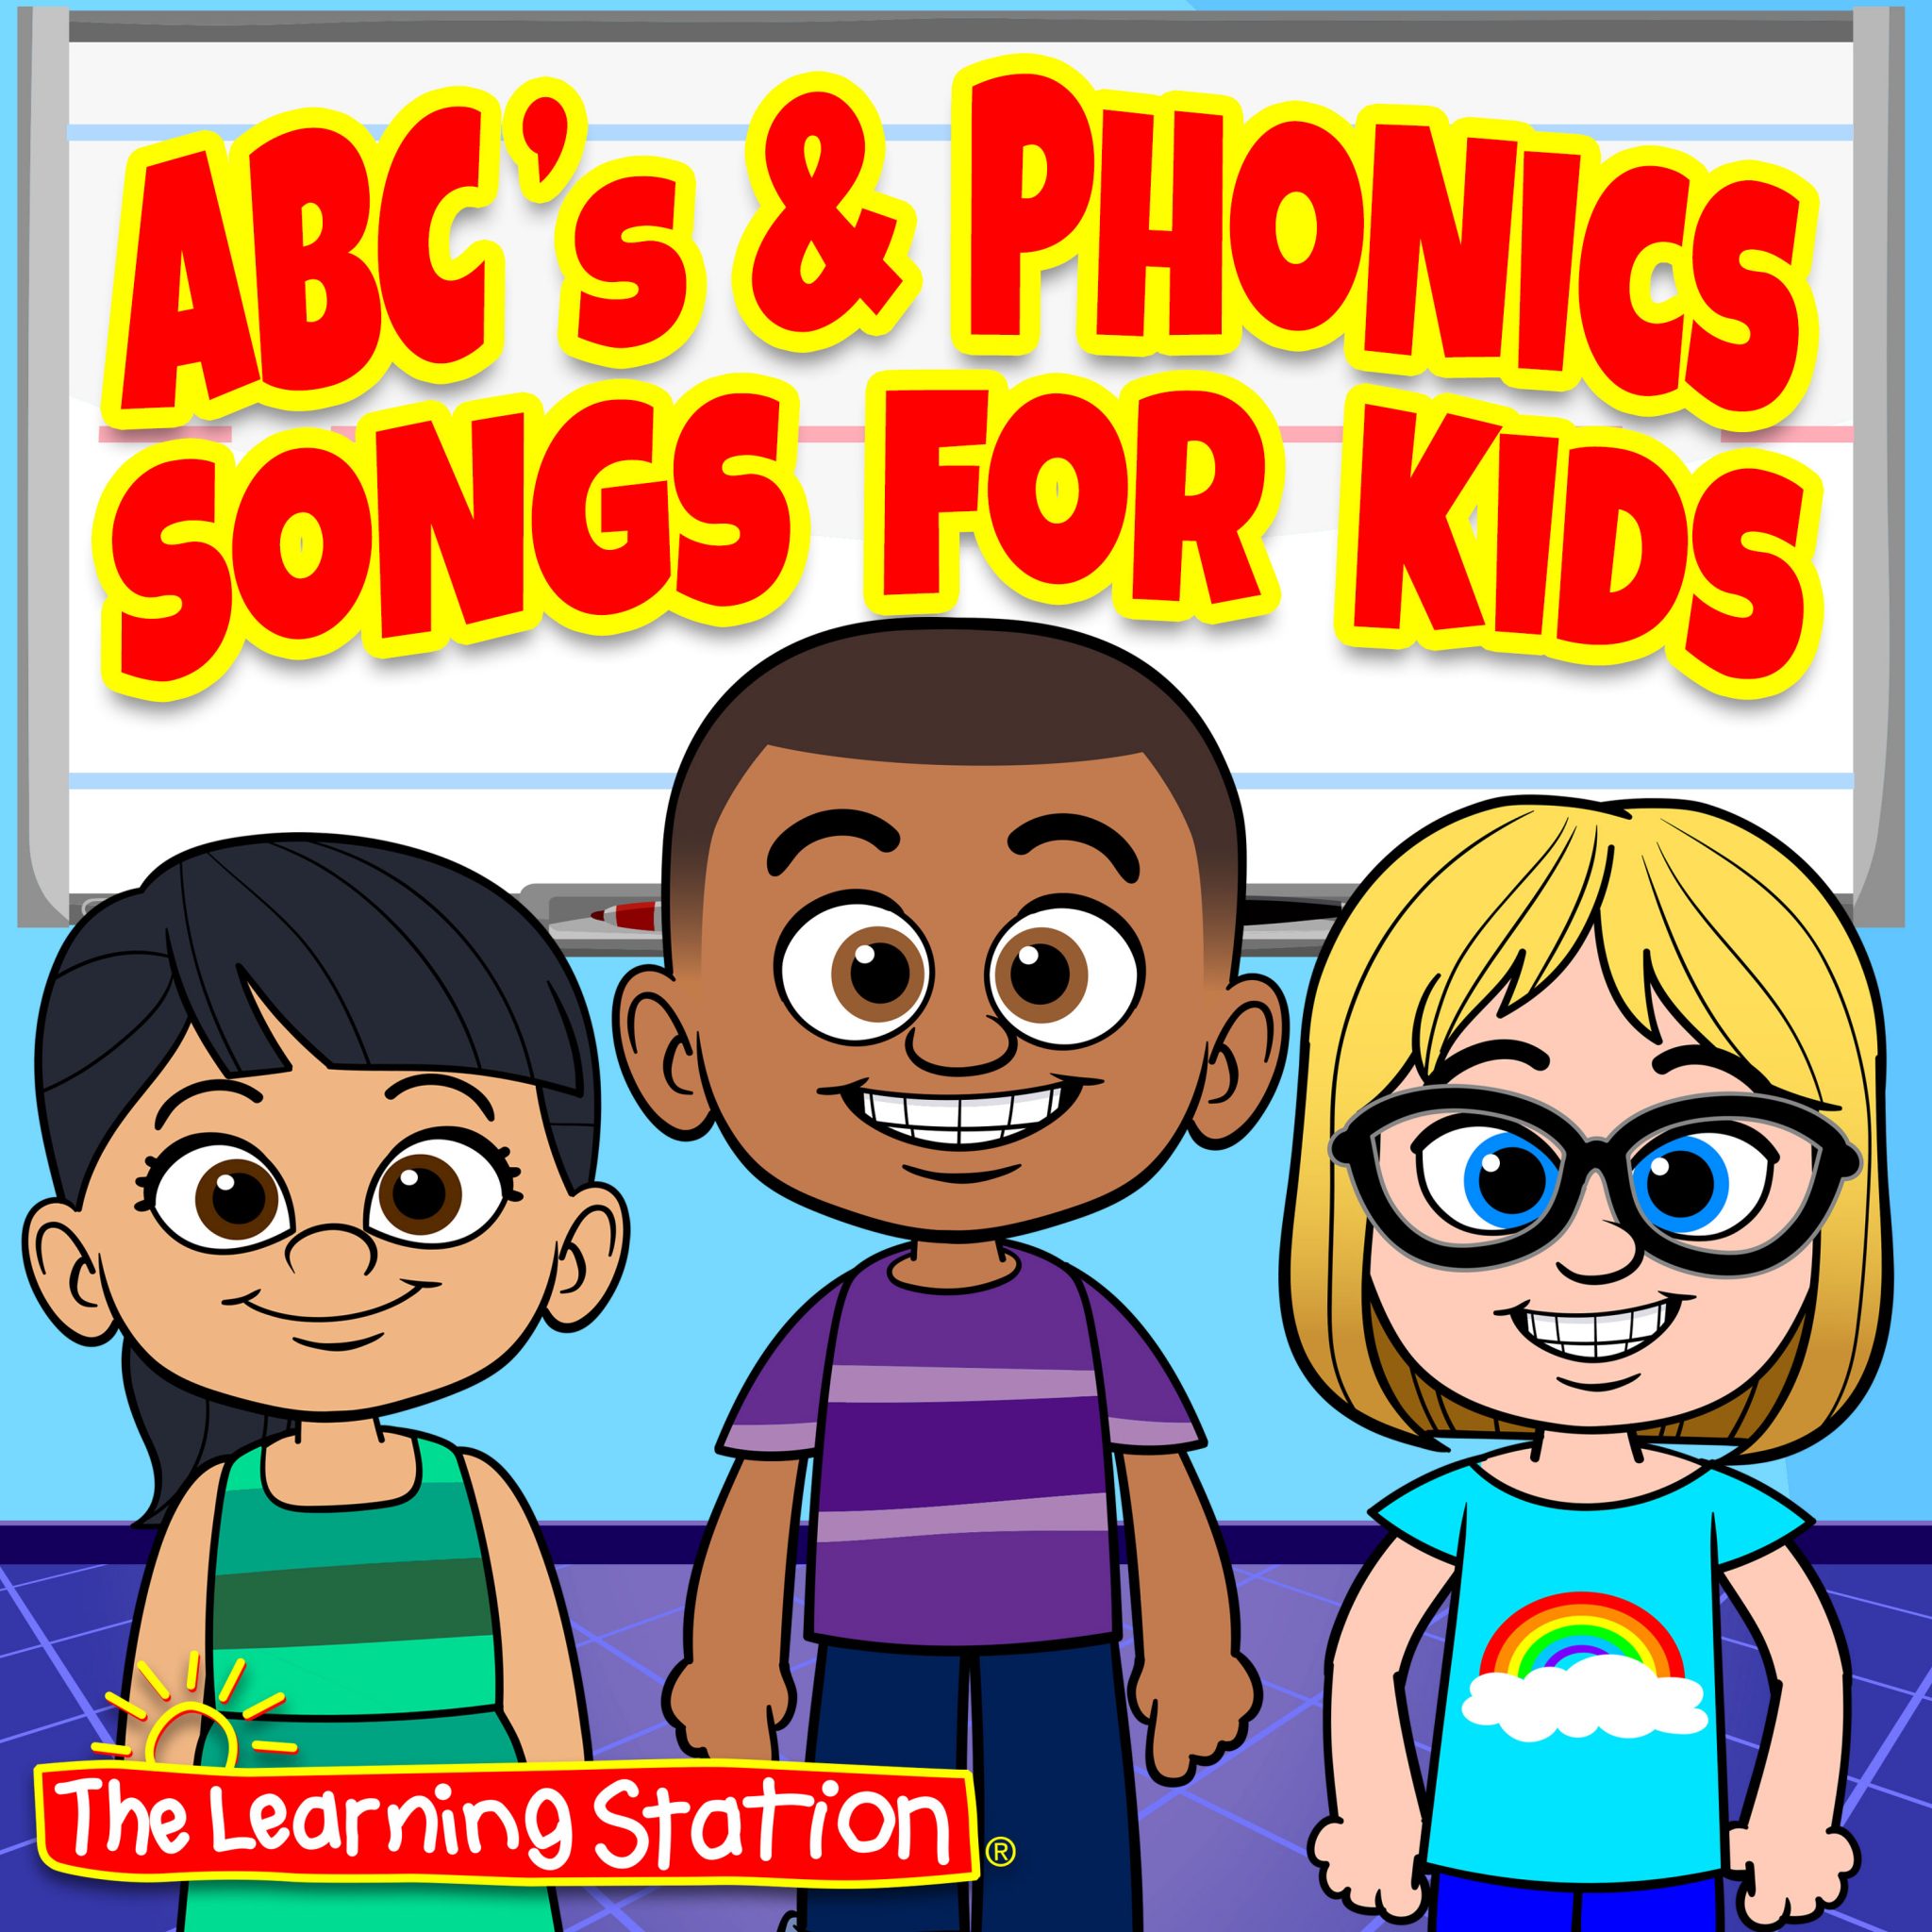 abc-s-phonics-songs-for-kids-the-learning-station